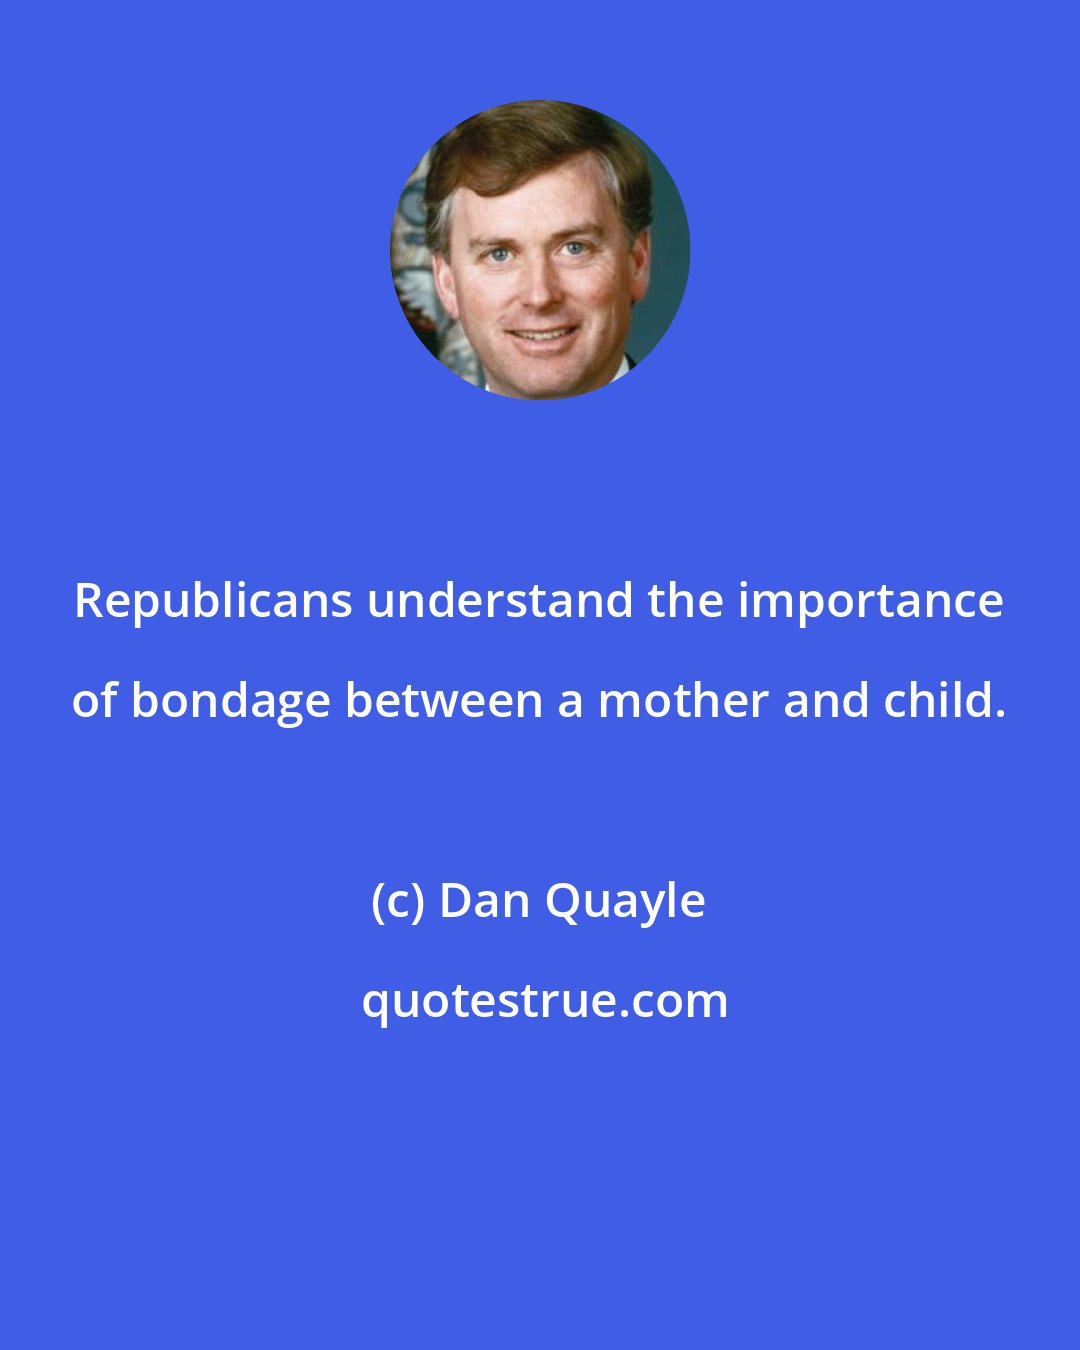 Dan Quayle: Republicans understand the importance of bondage between a mother and child.